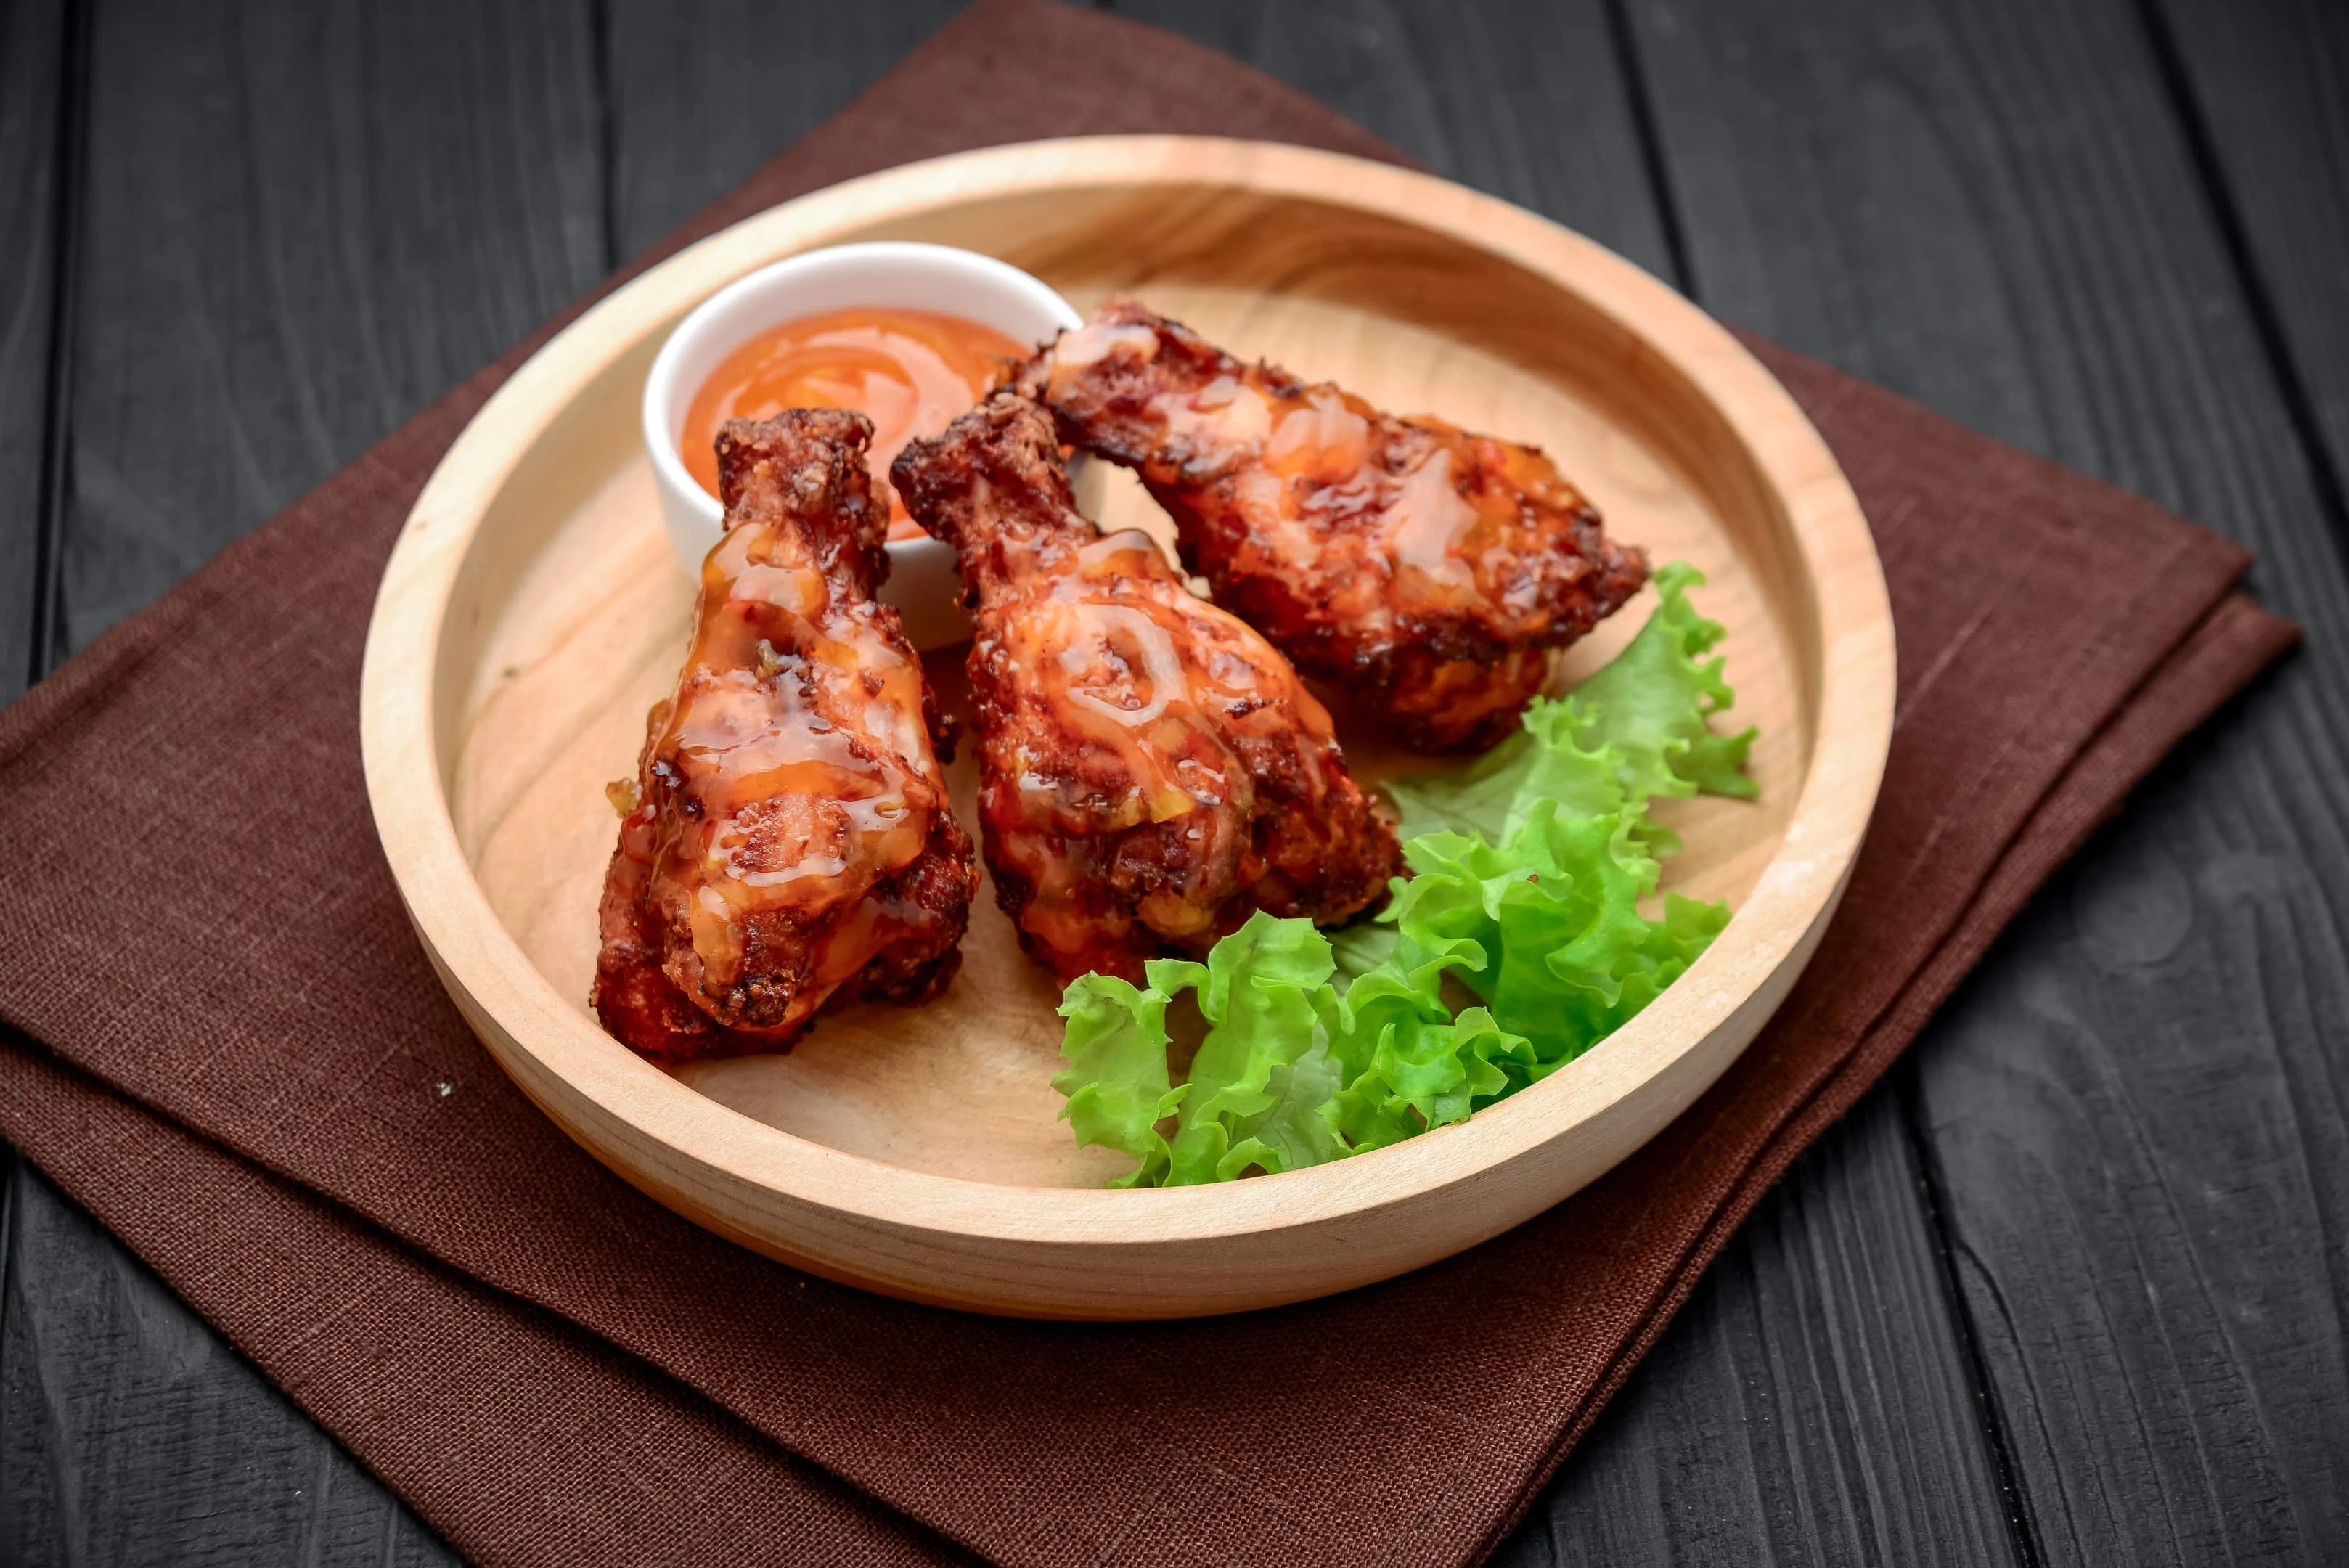 Caribbean jerk chicken wings with spicy chili sauce on wooden plate